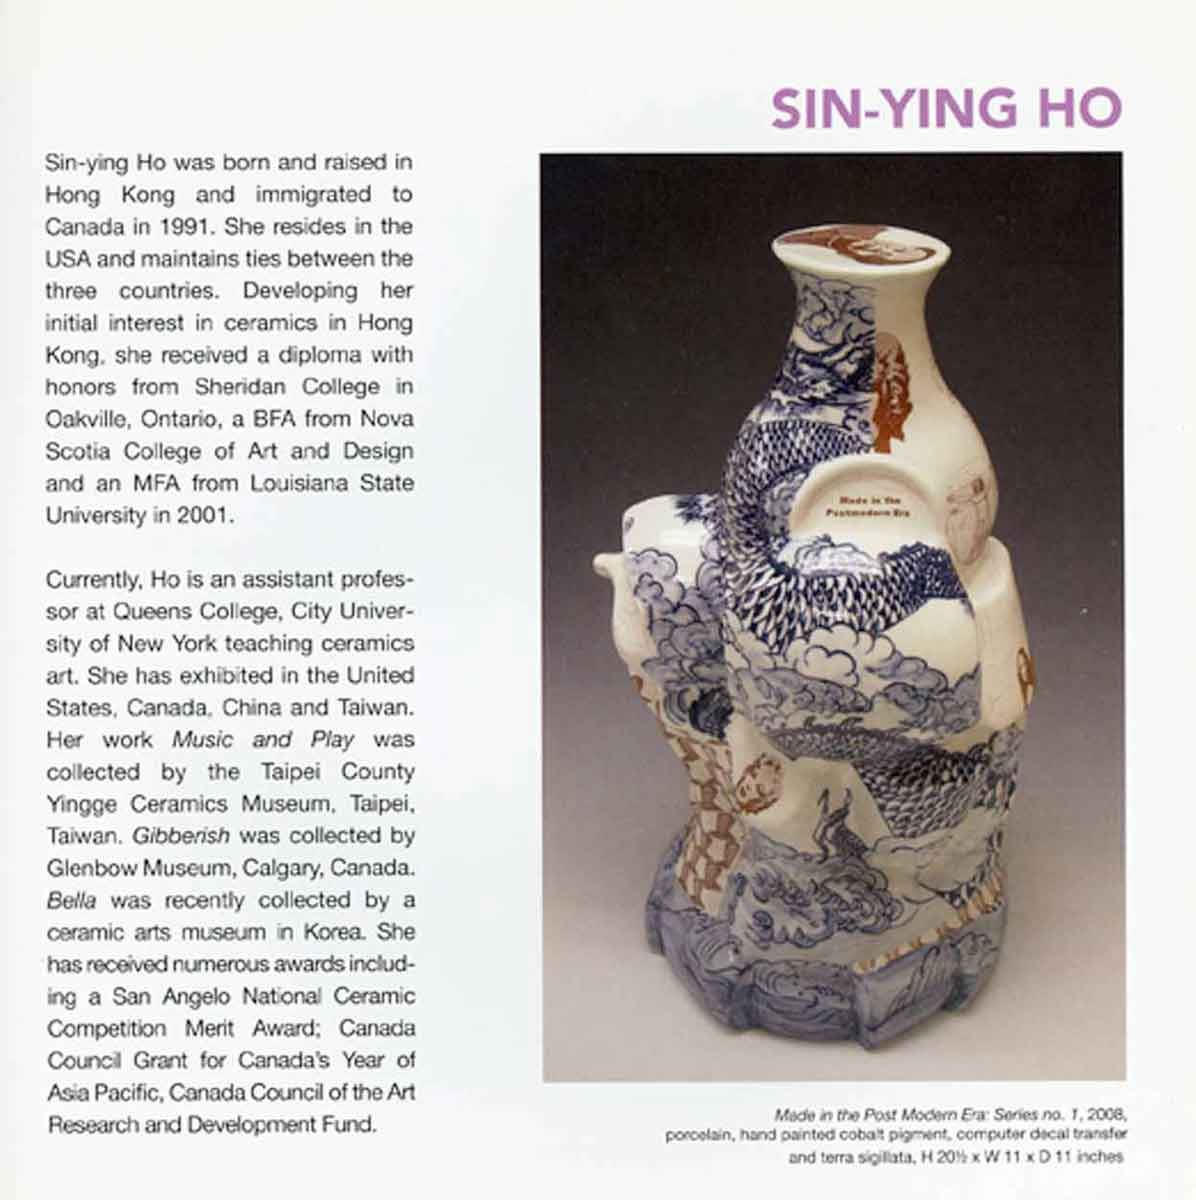 Excerpt from Exhibition Catalog, Pop: The Global Citizen, 2009